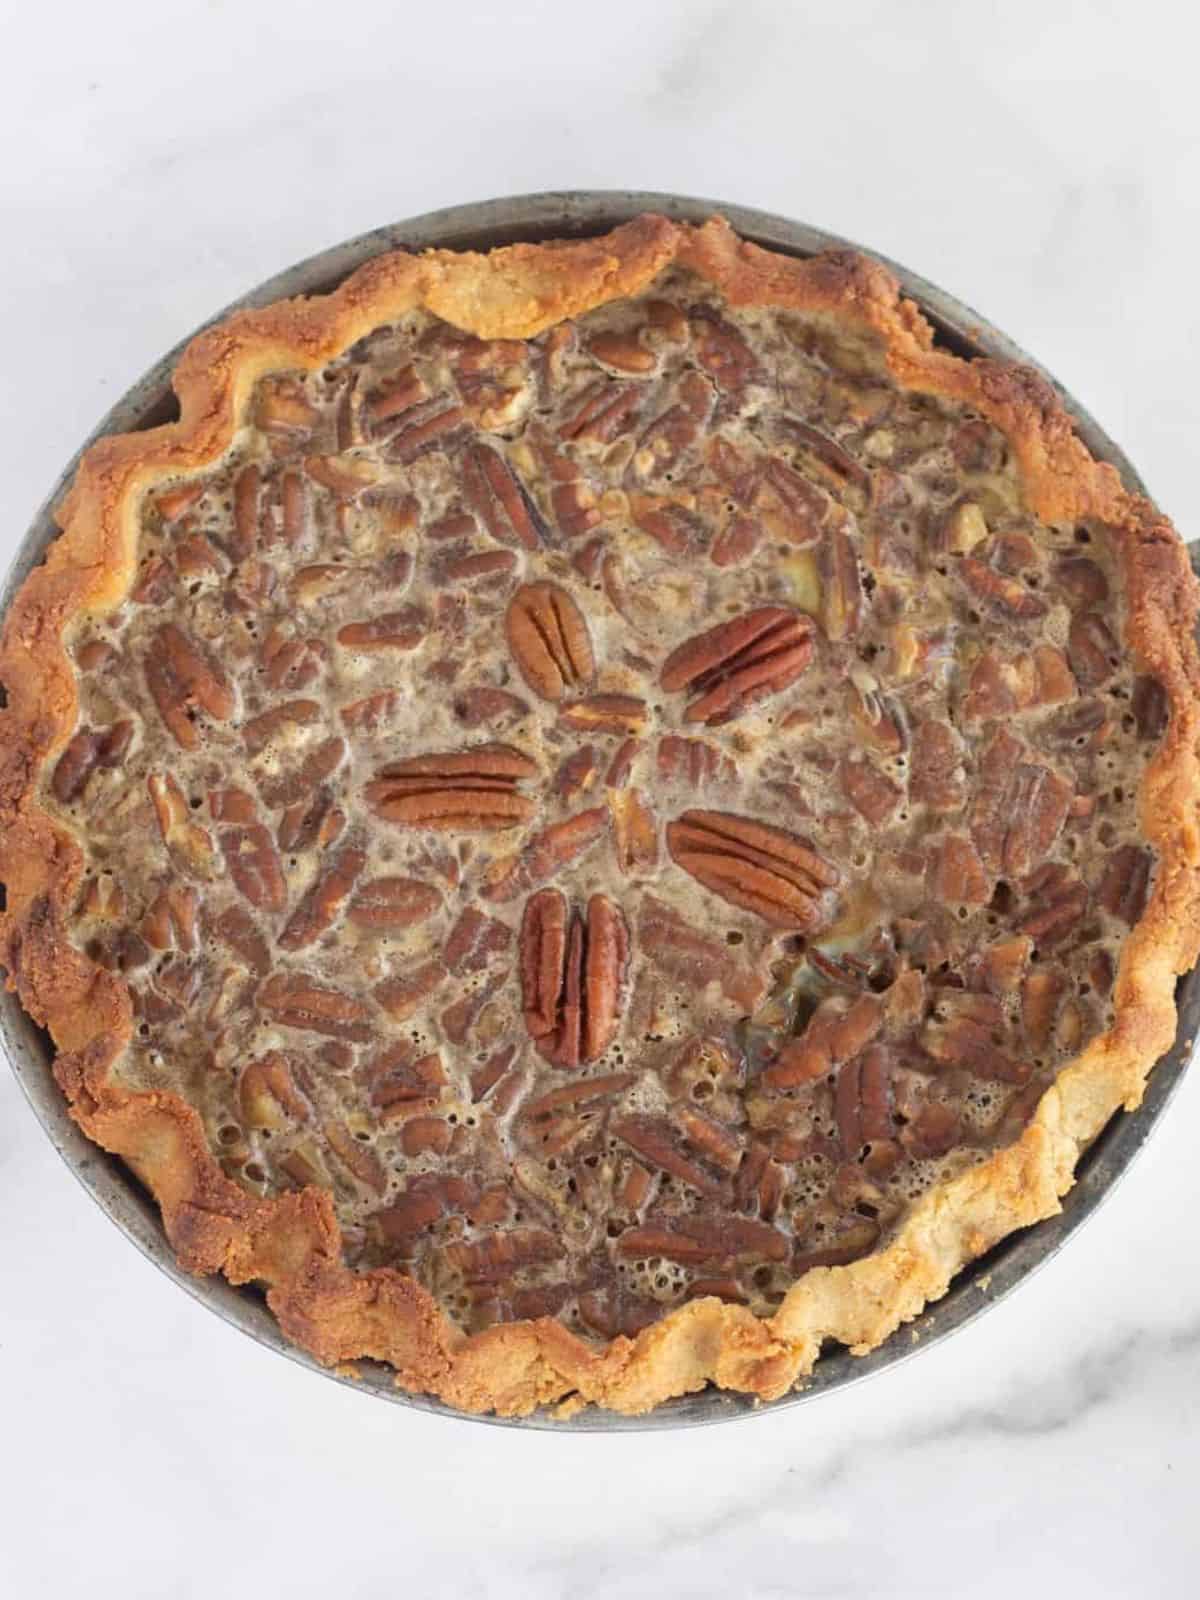 Overhead view of a baked sugar-free pecan pie.